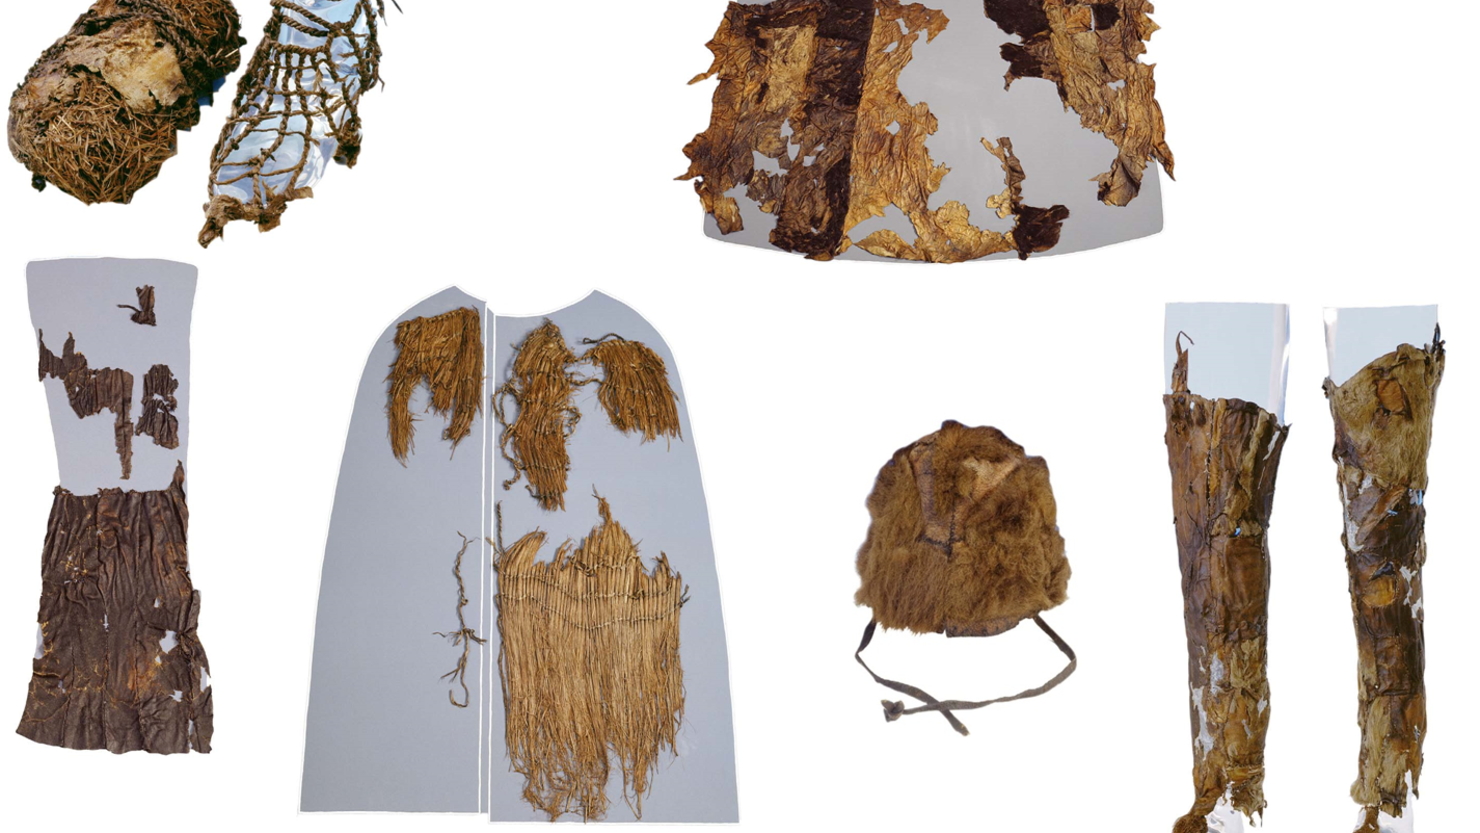 Otiz's clothing are on display from top left: A shoe with grass interior (left) and leather exterior (right), the leather coat (reassembled by the museum), leather loincloth, grass coat, fur hat, and leather leggings.